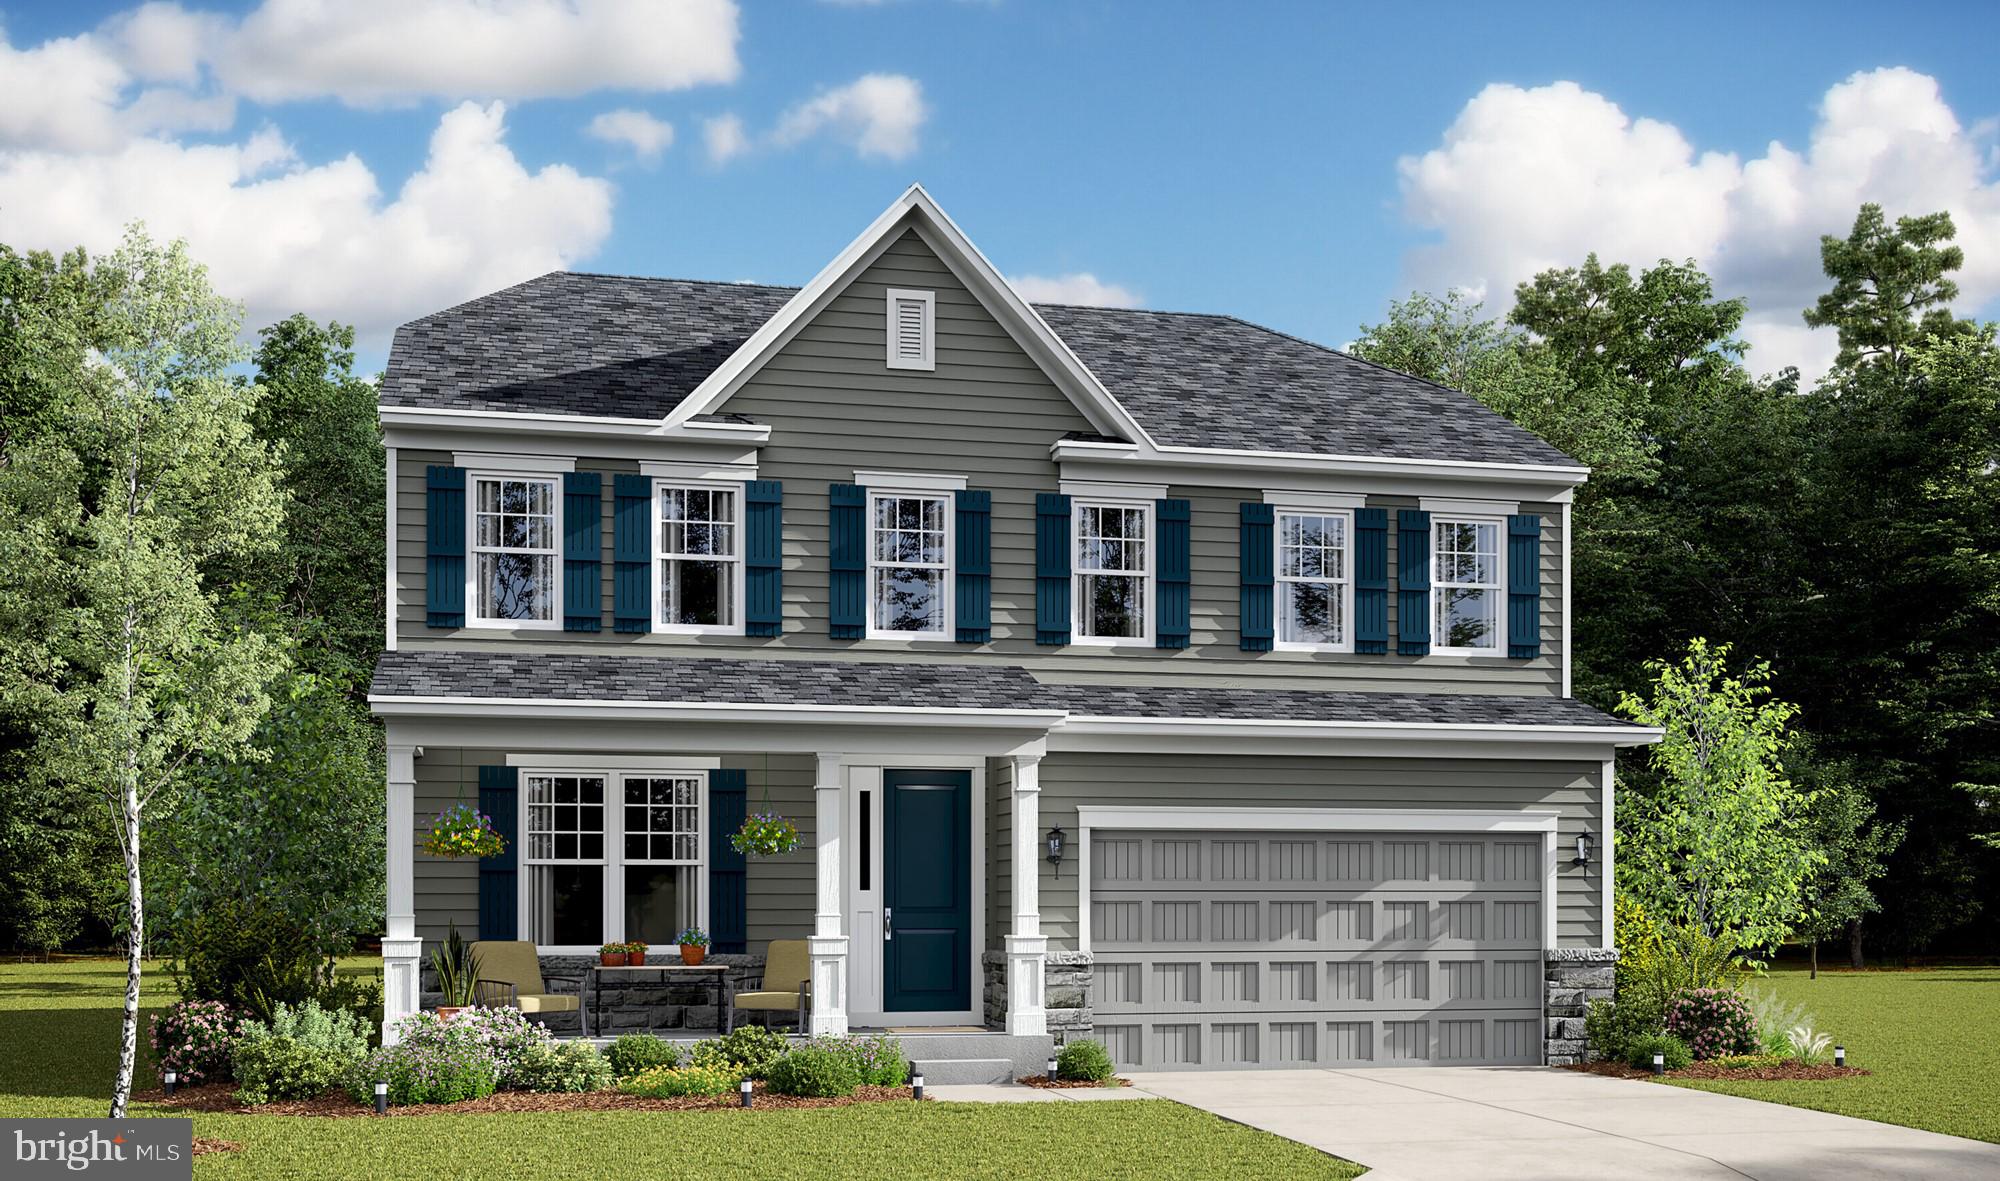 Grace Meadows, a brand new community offers an enclave of 18 contemporary single family homes in sou